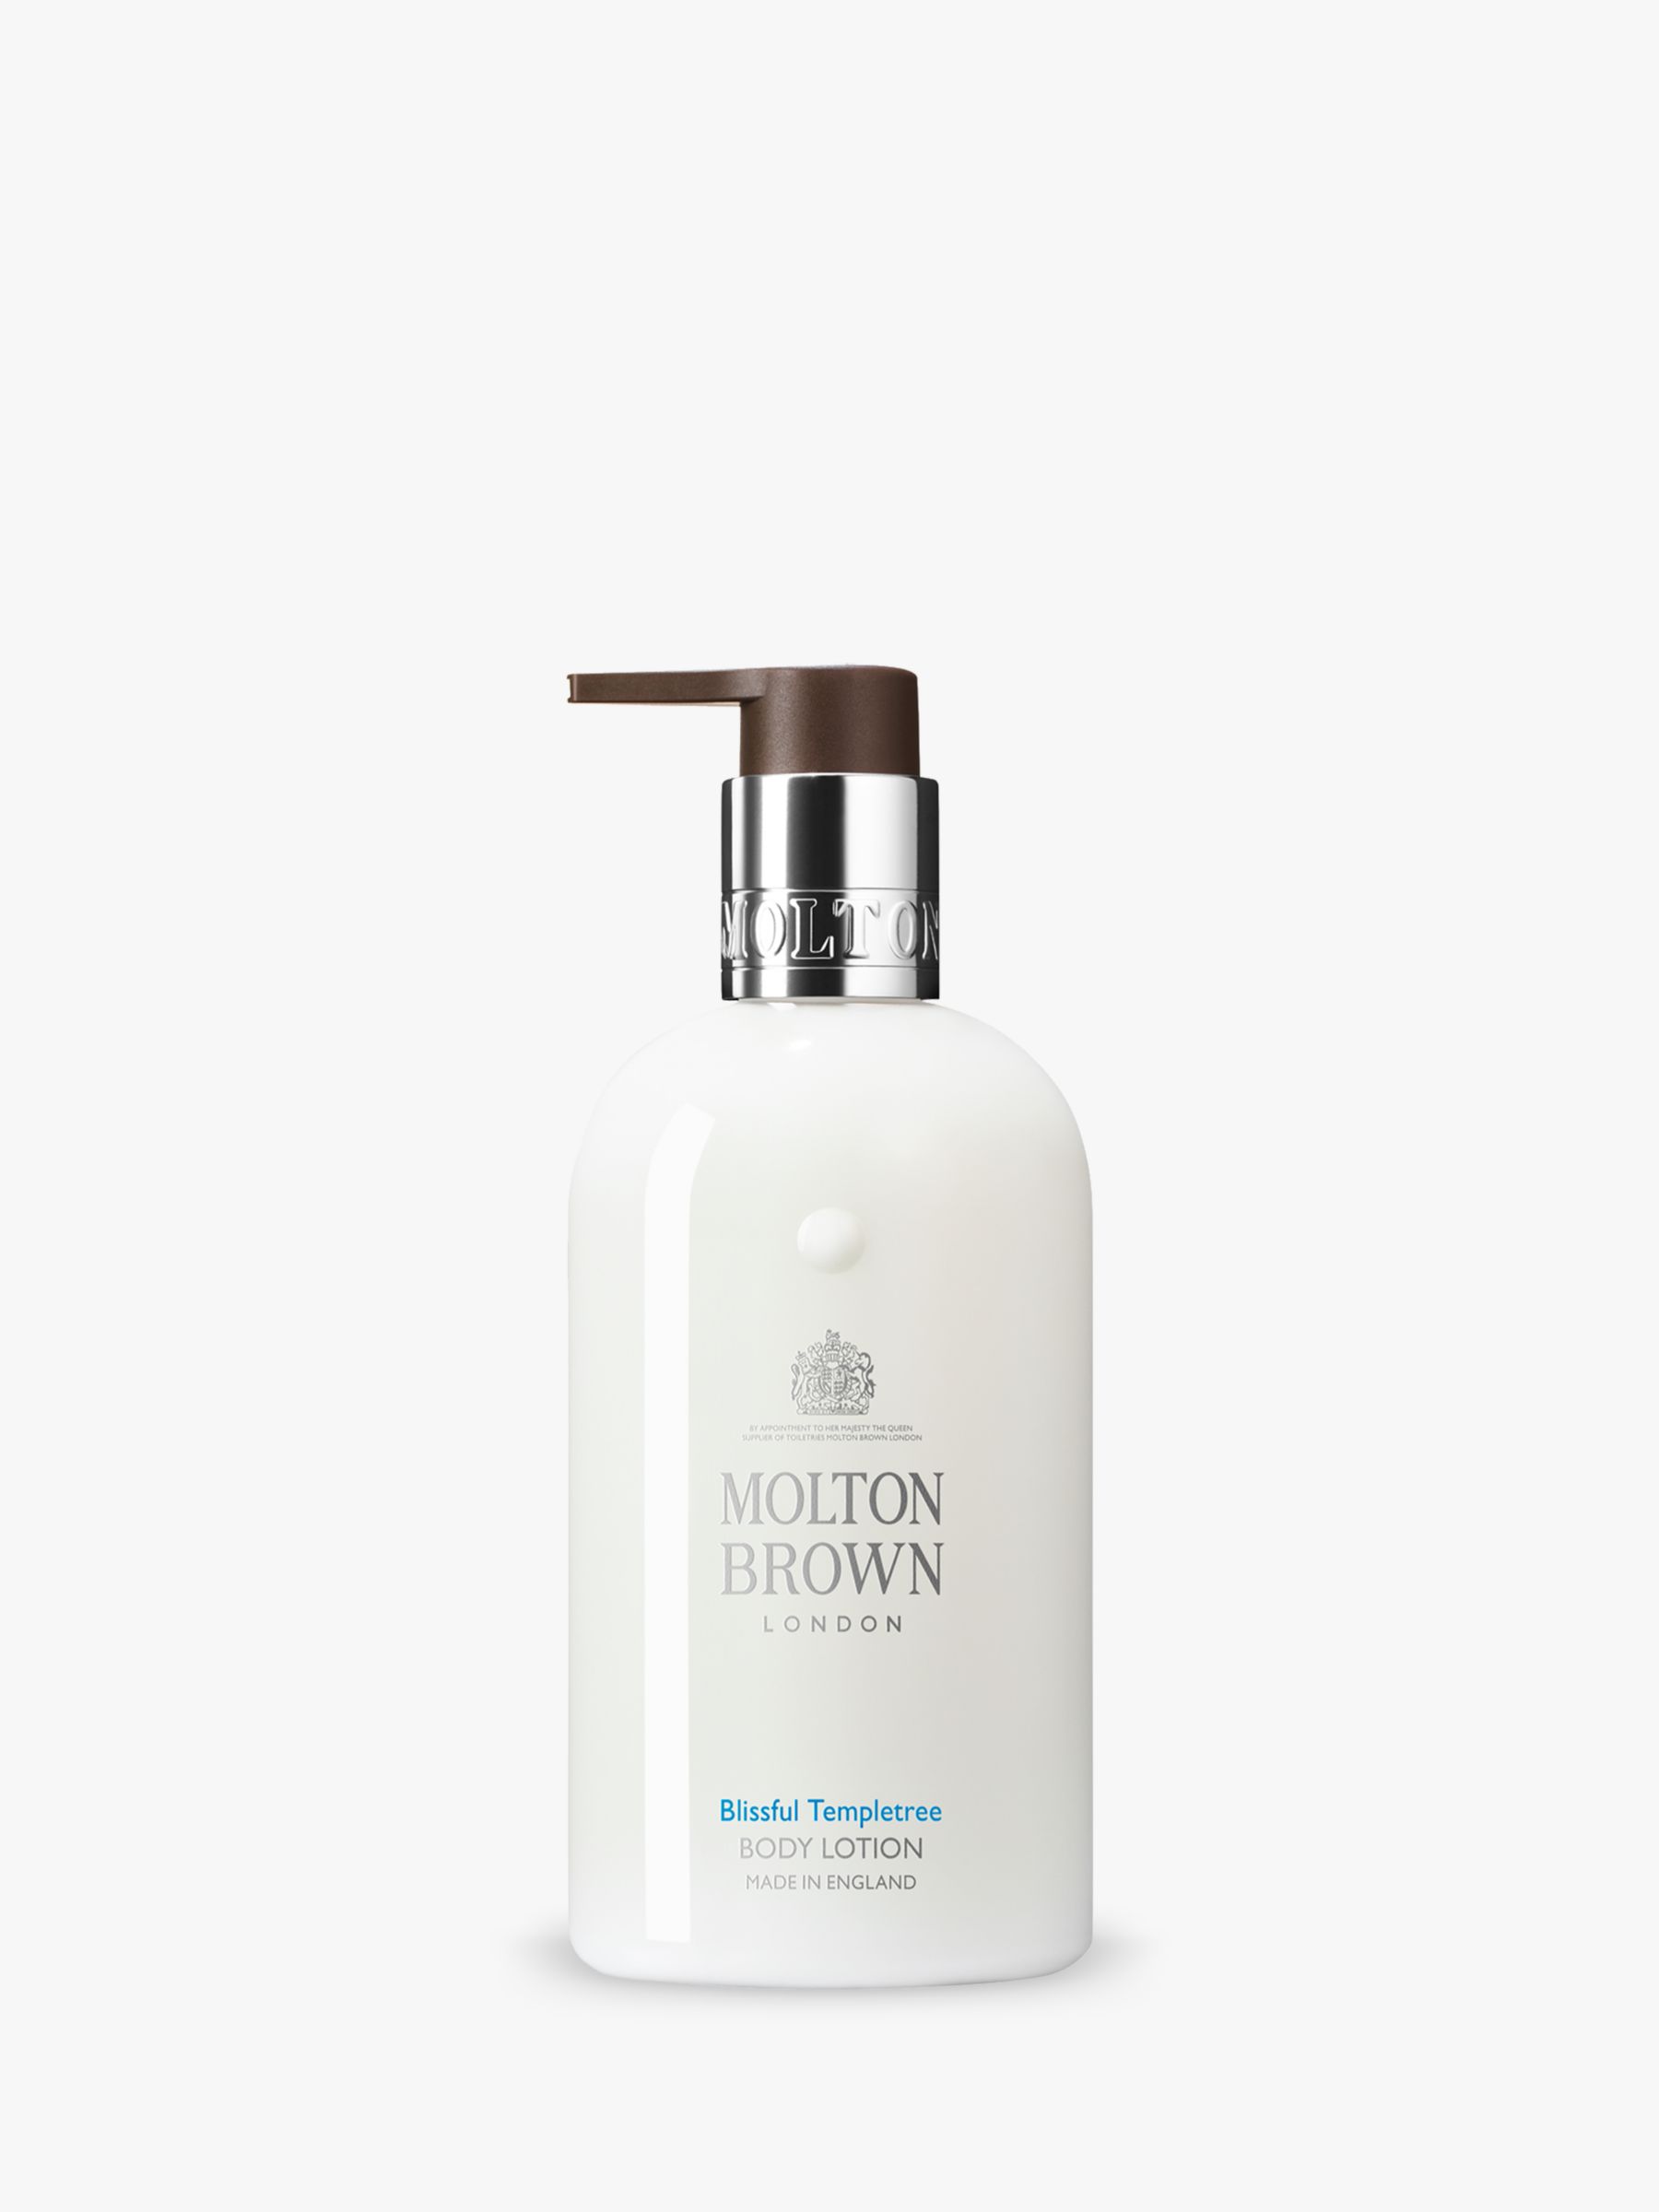 Molton Brown Blissful Templetree Body Lotion, 300ml 1